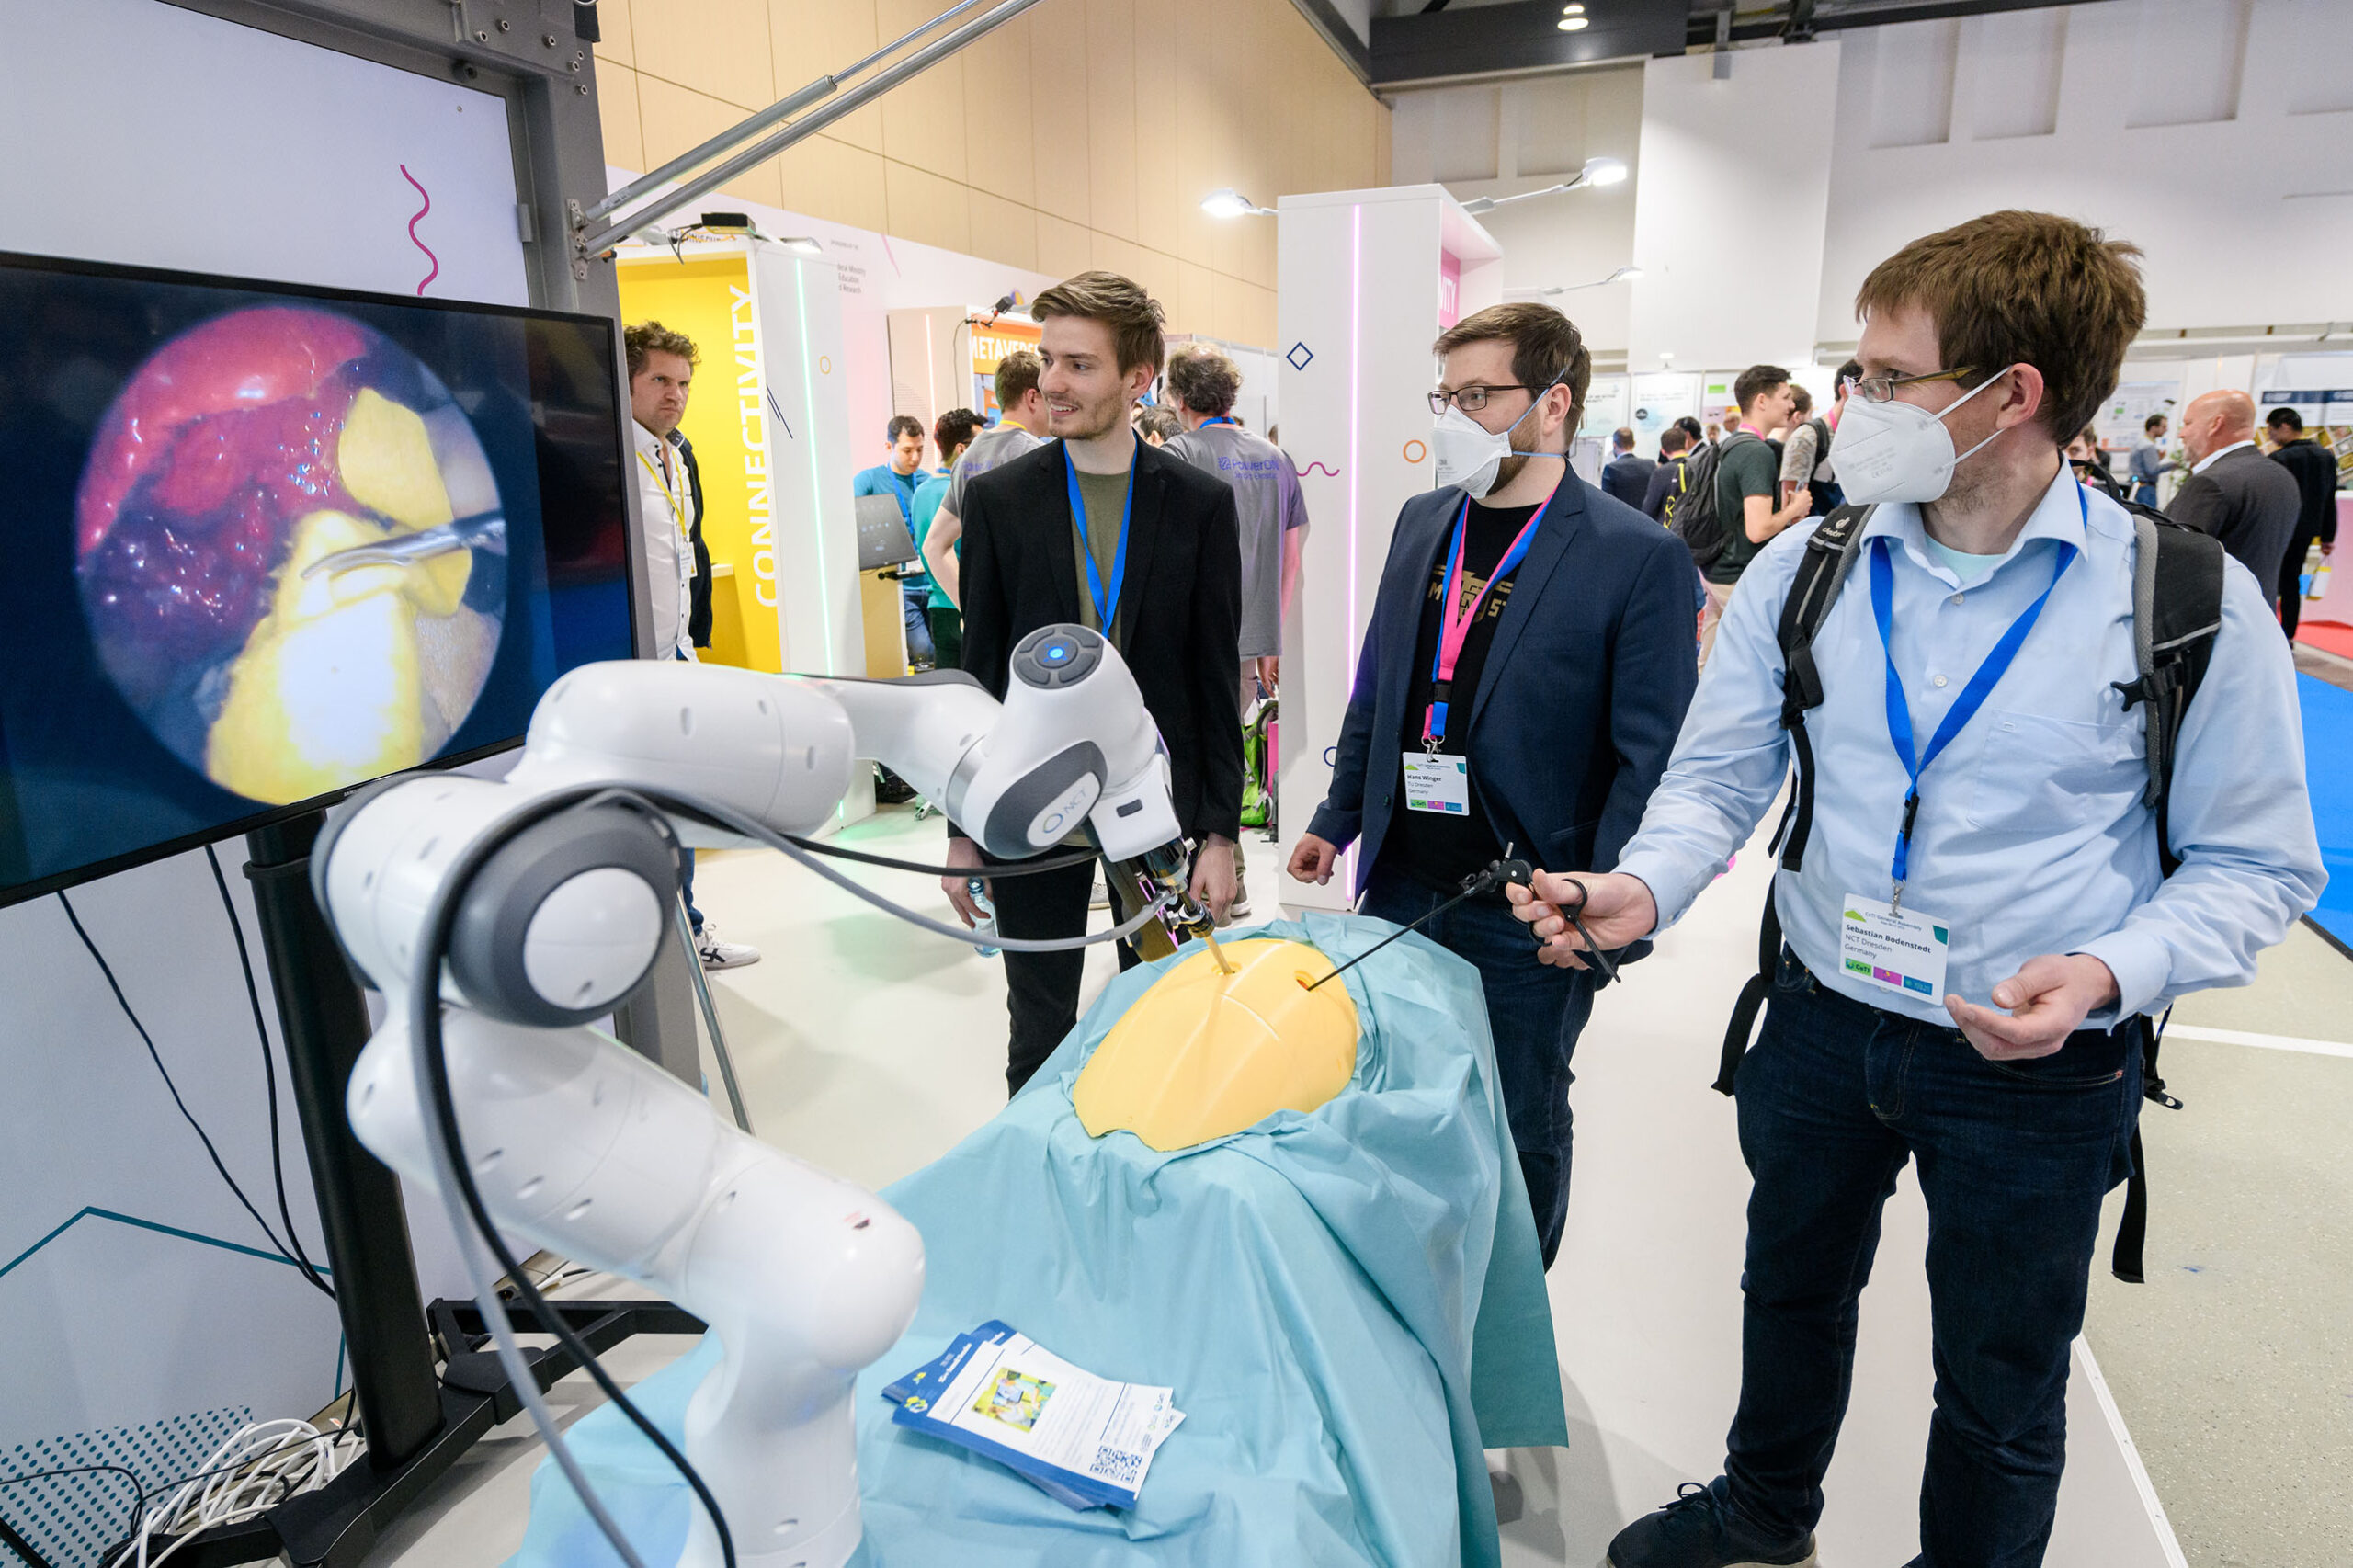 Photograph from the IEEE 5G Summit where the use of robotic assistance in medicine is presented